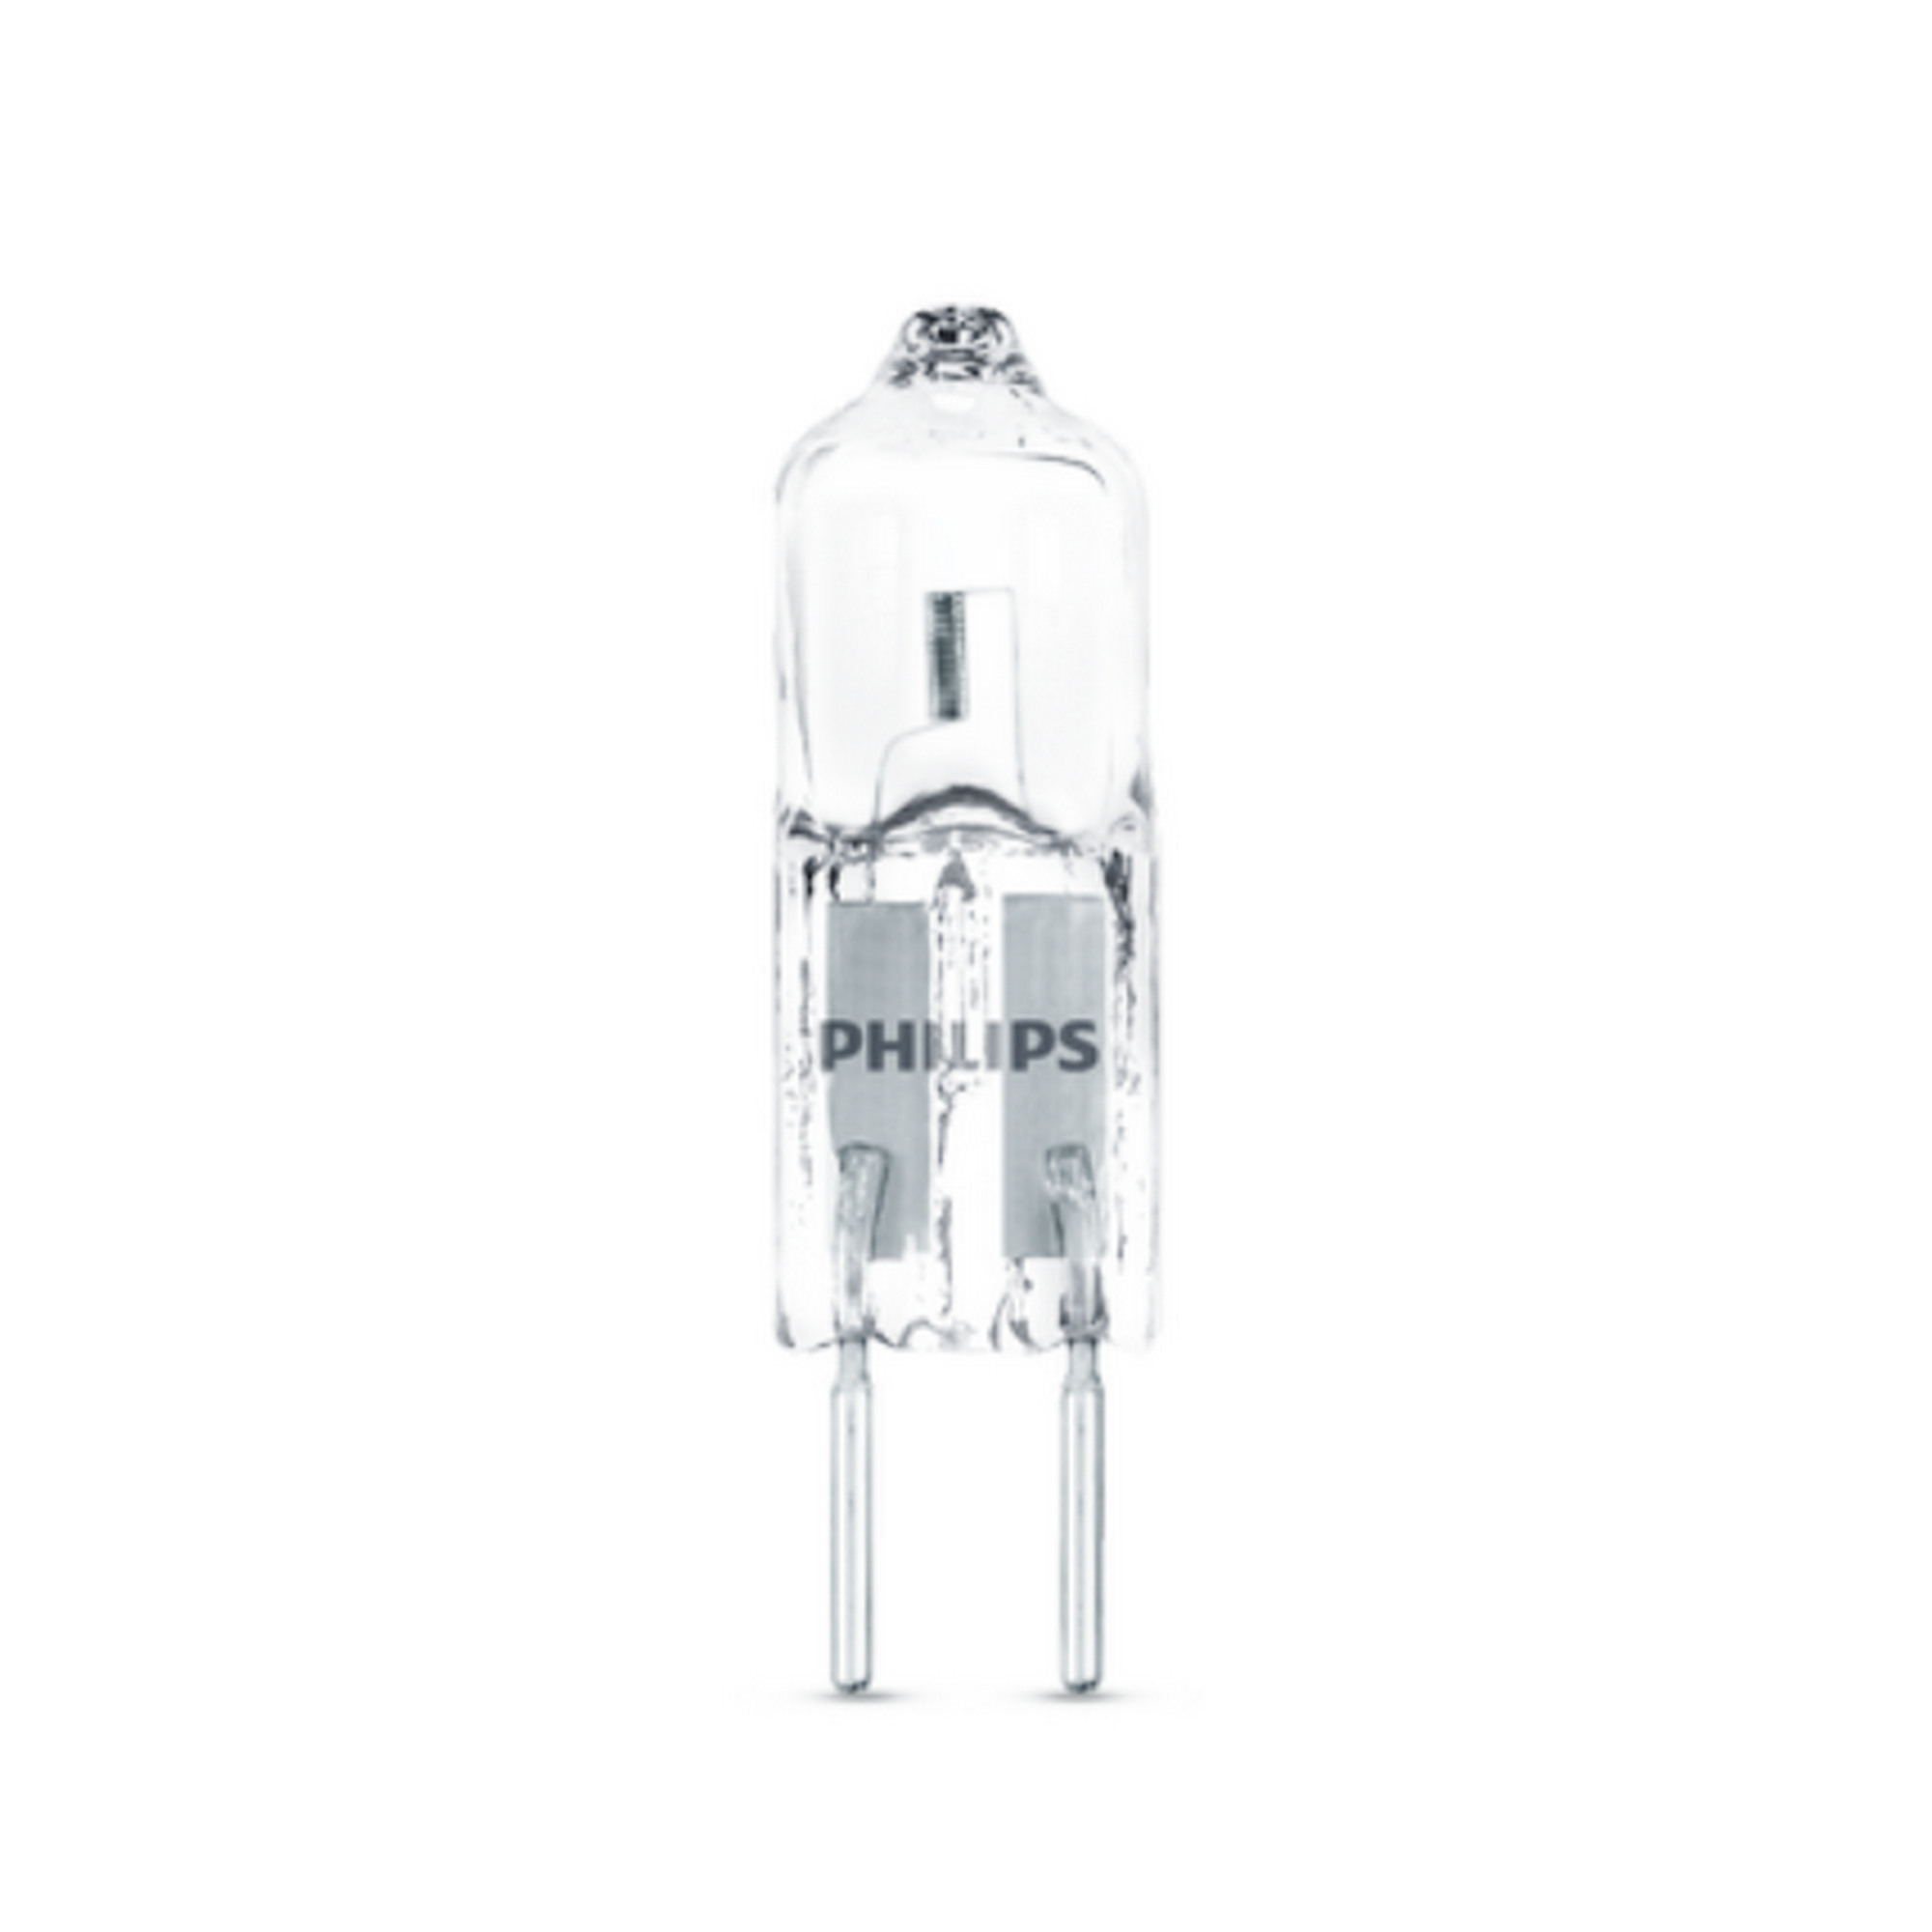 Halogenbrenner G4 225 lm transparent dimmbar 2 Stk. + product picture